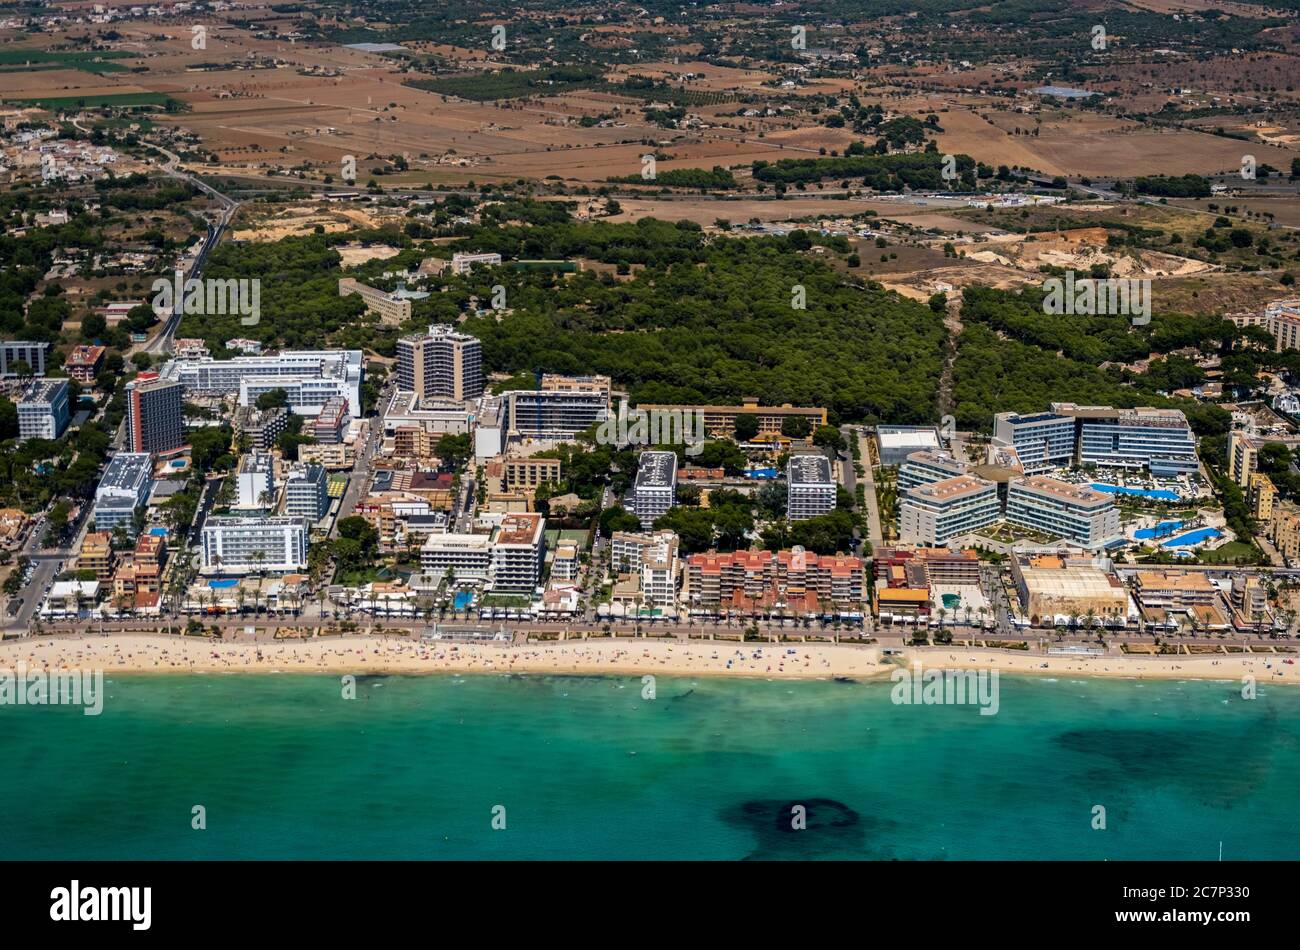 Aerial view, discotheque Oberbayern, ham street, beer street, beach of Arenal with Balneario 5, Balneario 6, Balneario 5, S'arenal, Arenal, Ballermann Stock Photo